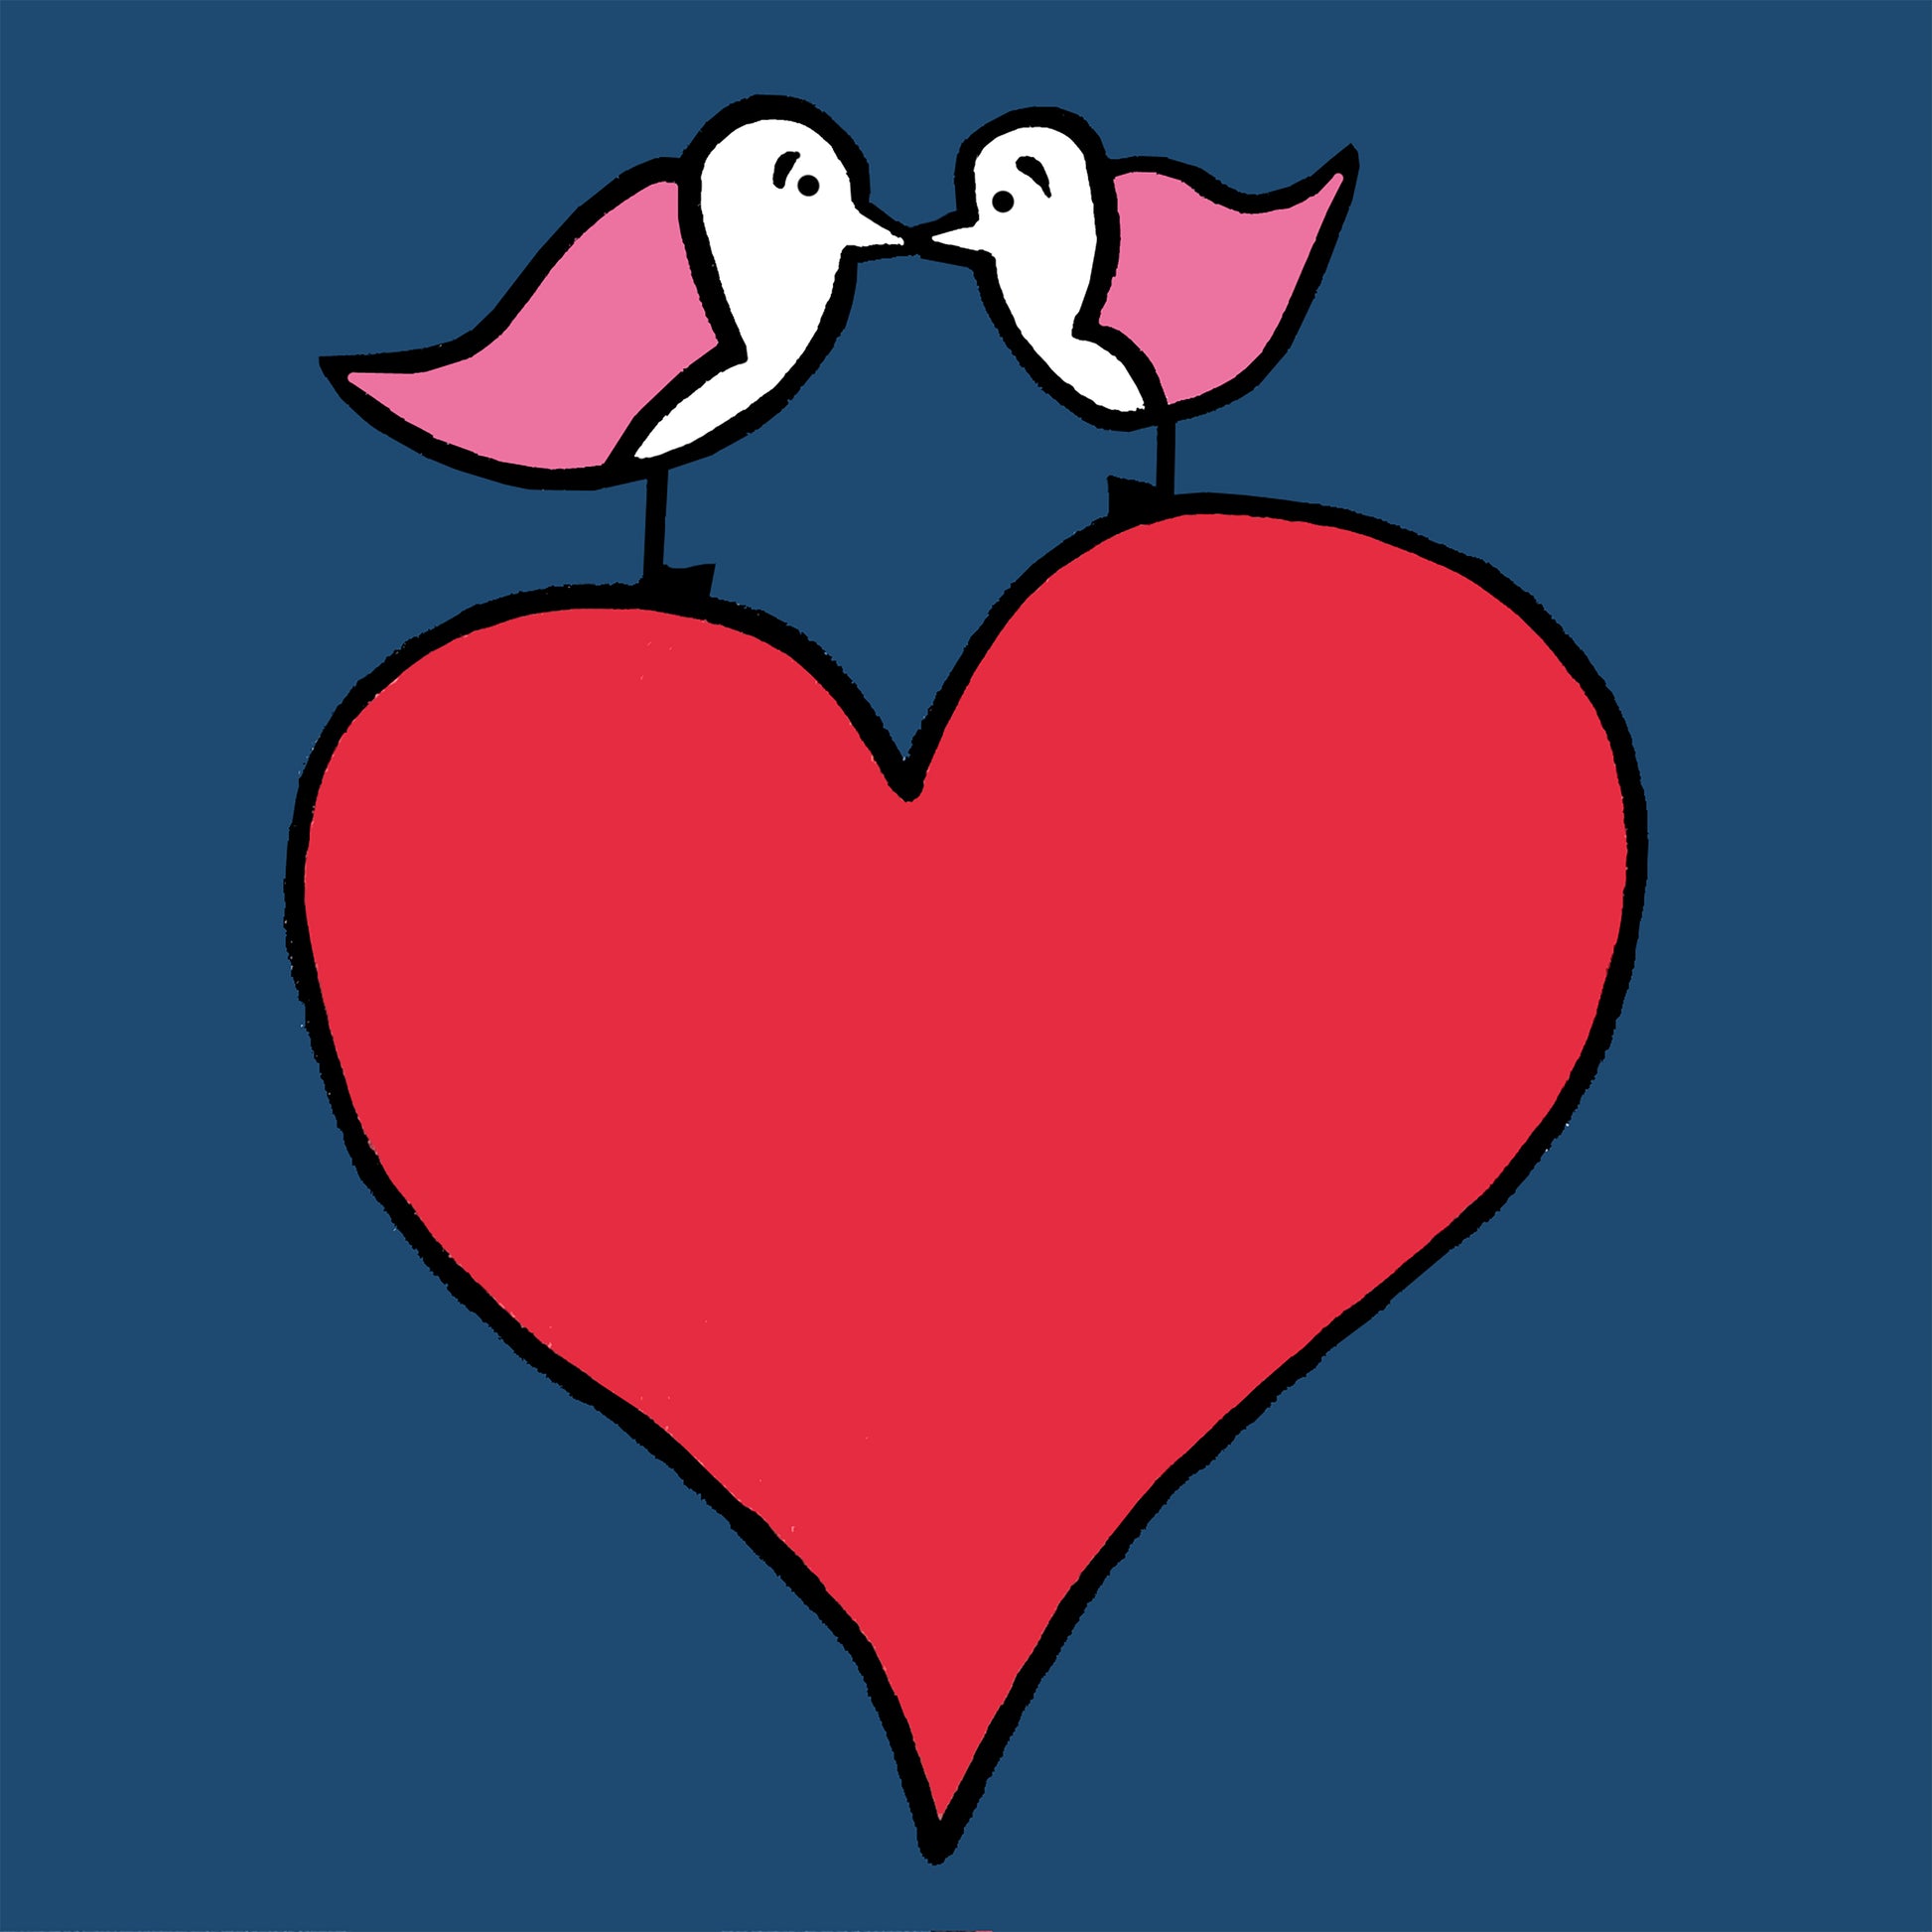 Two pink winged seagulls facing each other with beaks touching are on top a bright red heart. The background is a navy colour, all the details and shapes are outlined in thick black. The print is called my big heart.